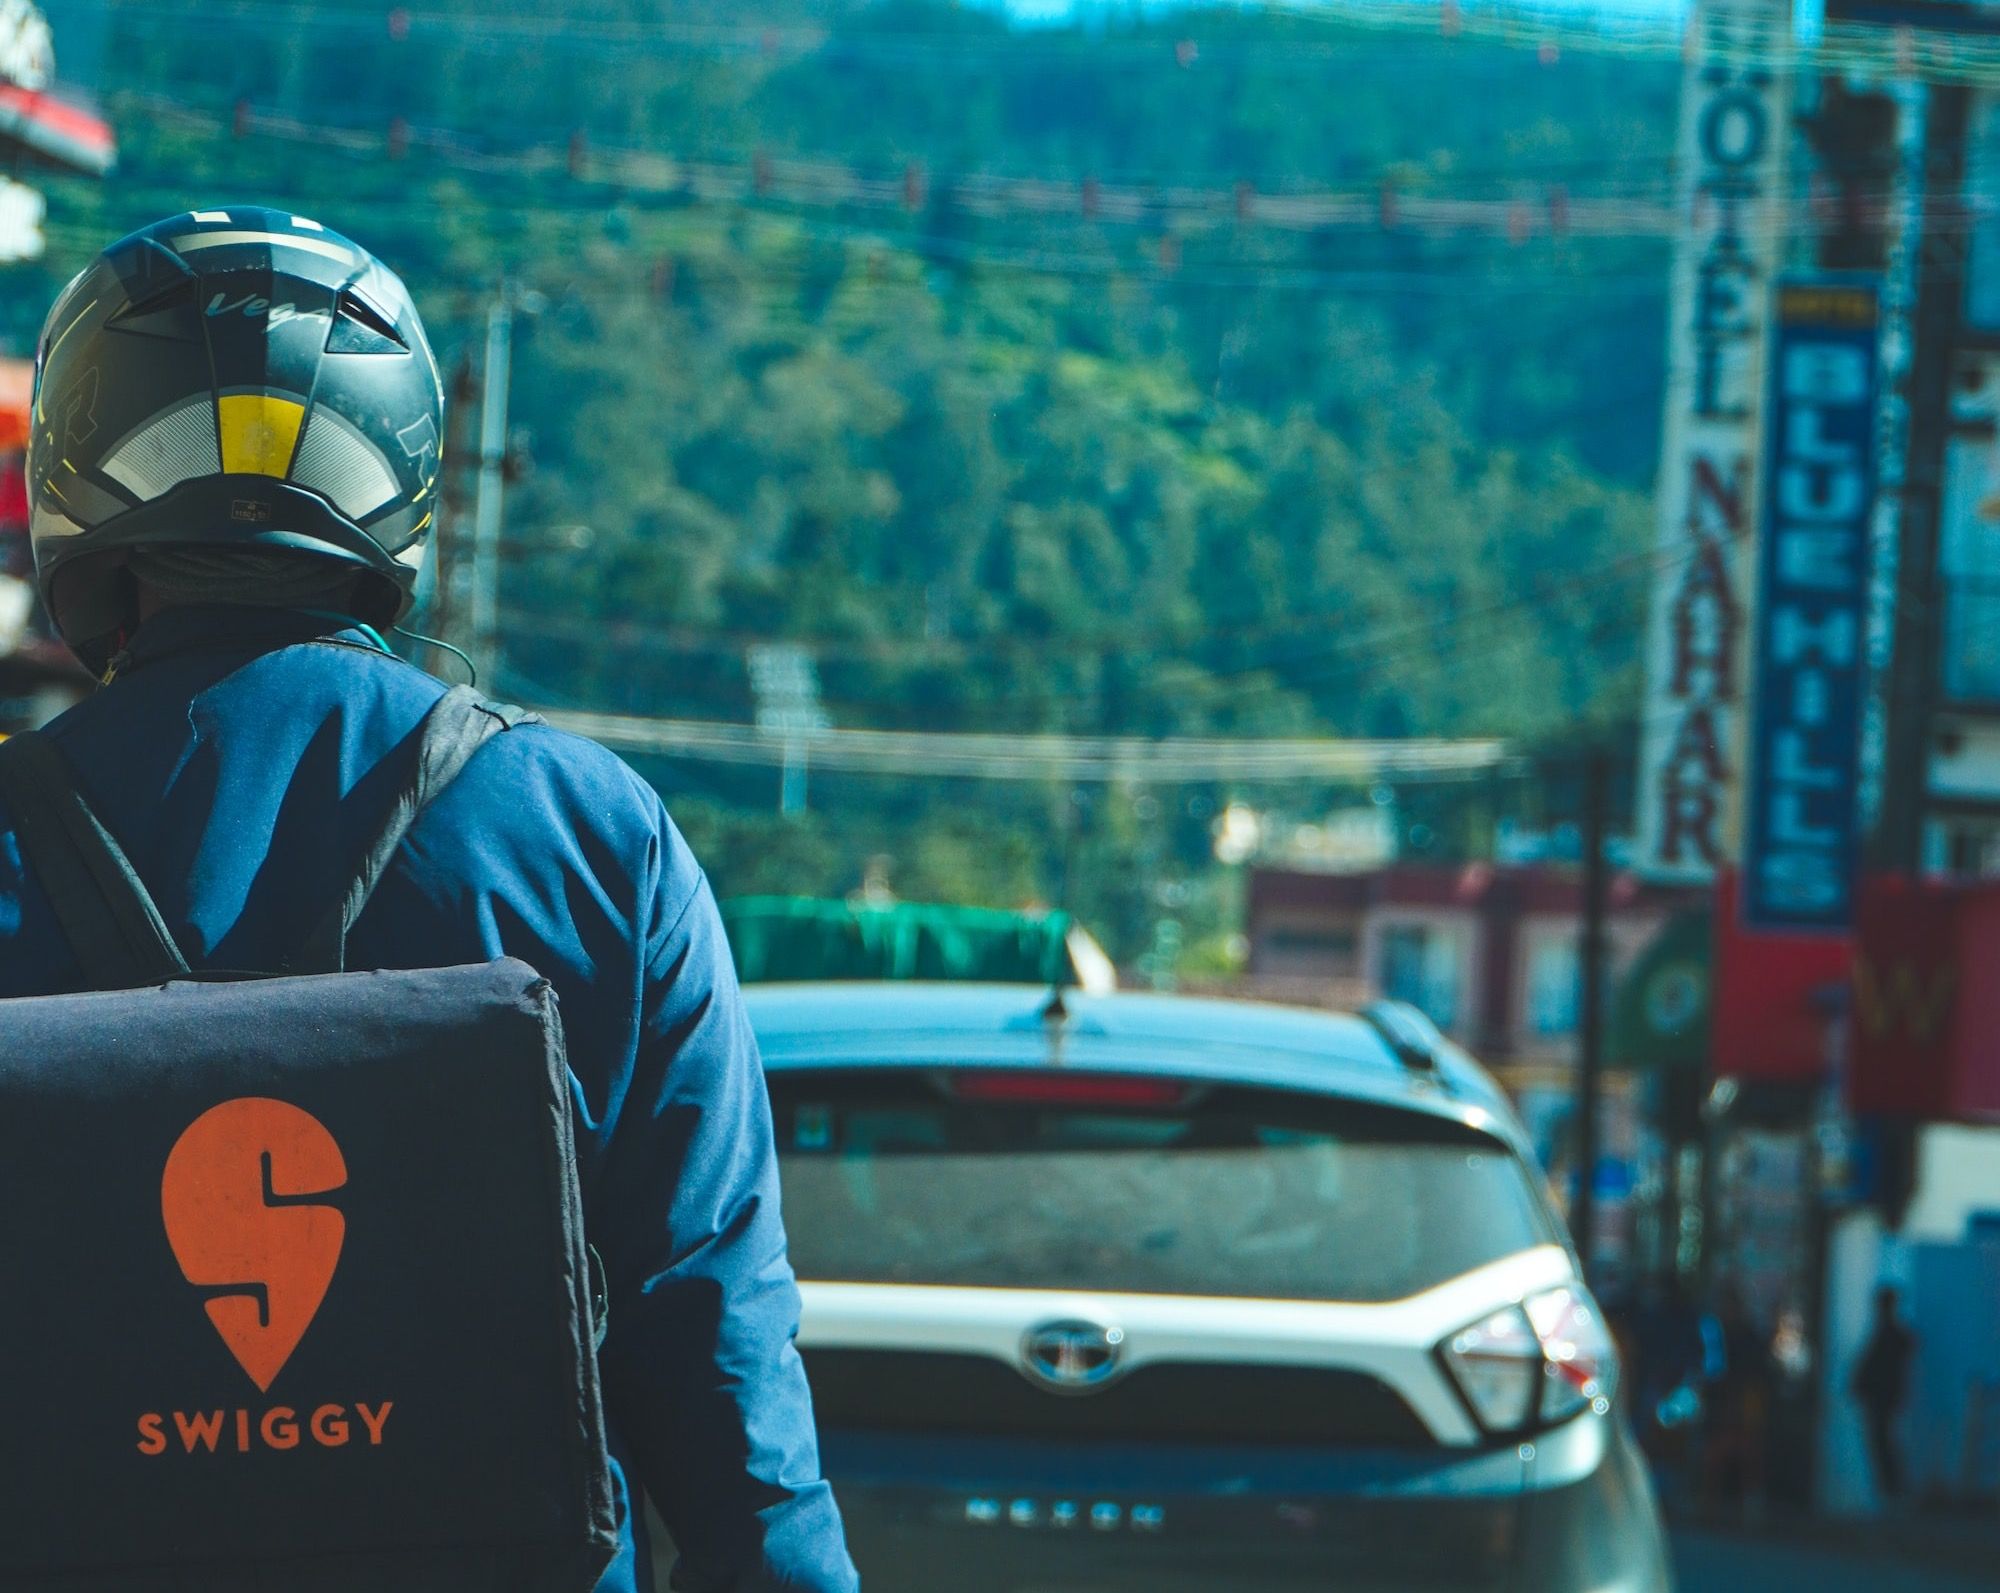 India food delivery giant Swiggy launches a co-branded credit card